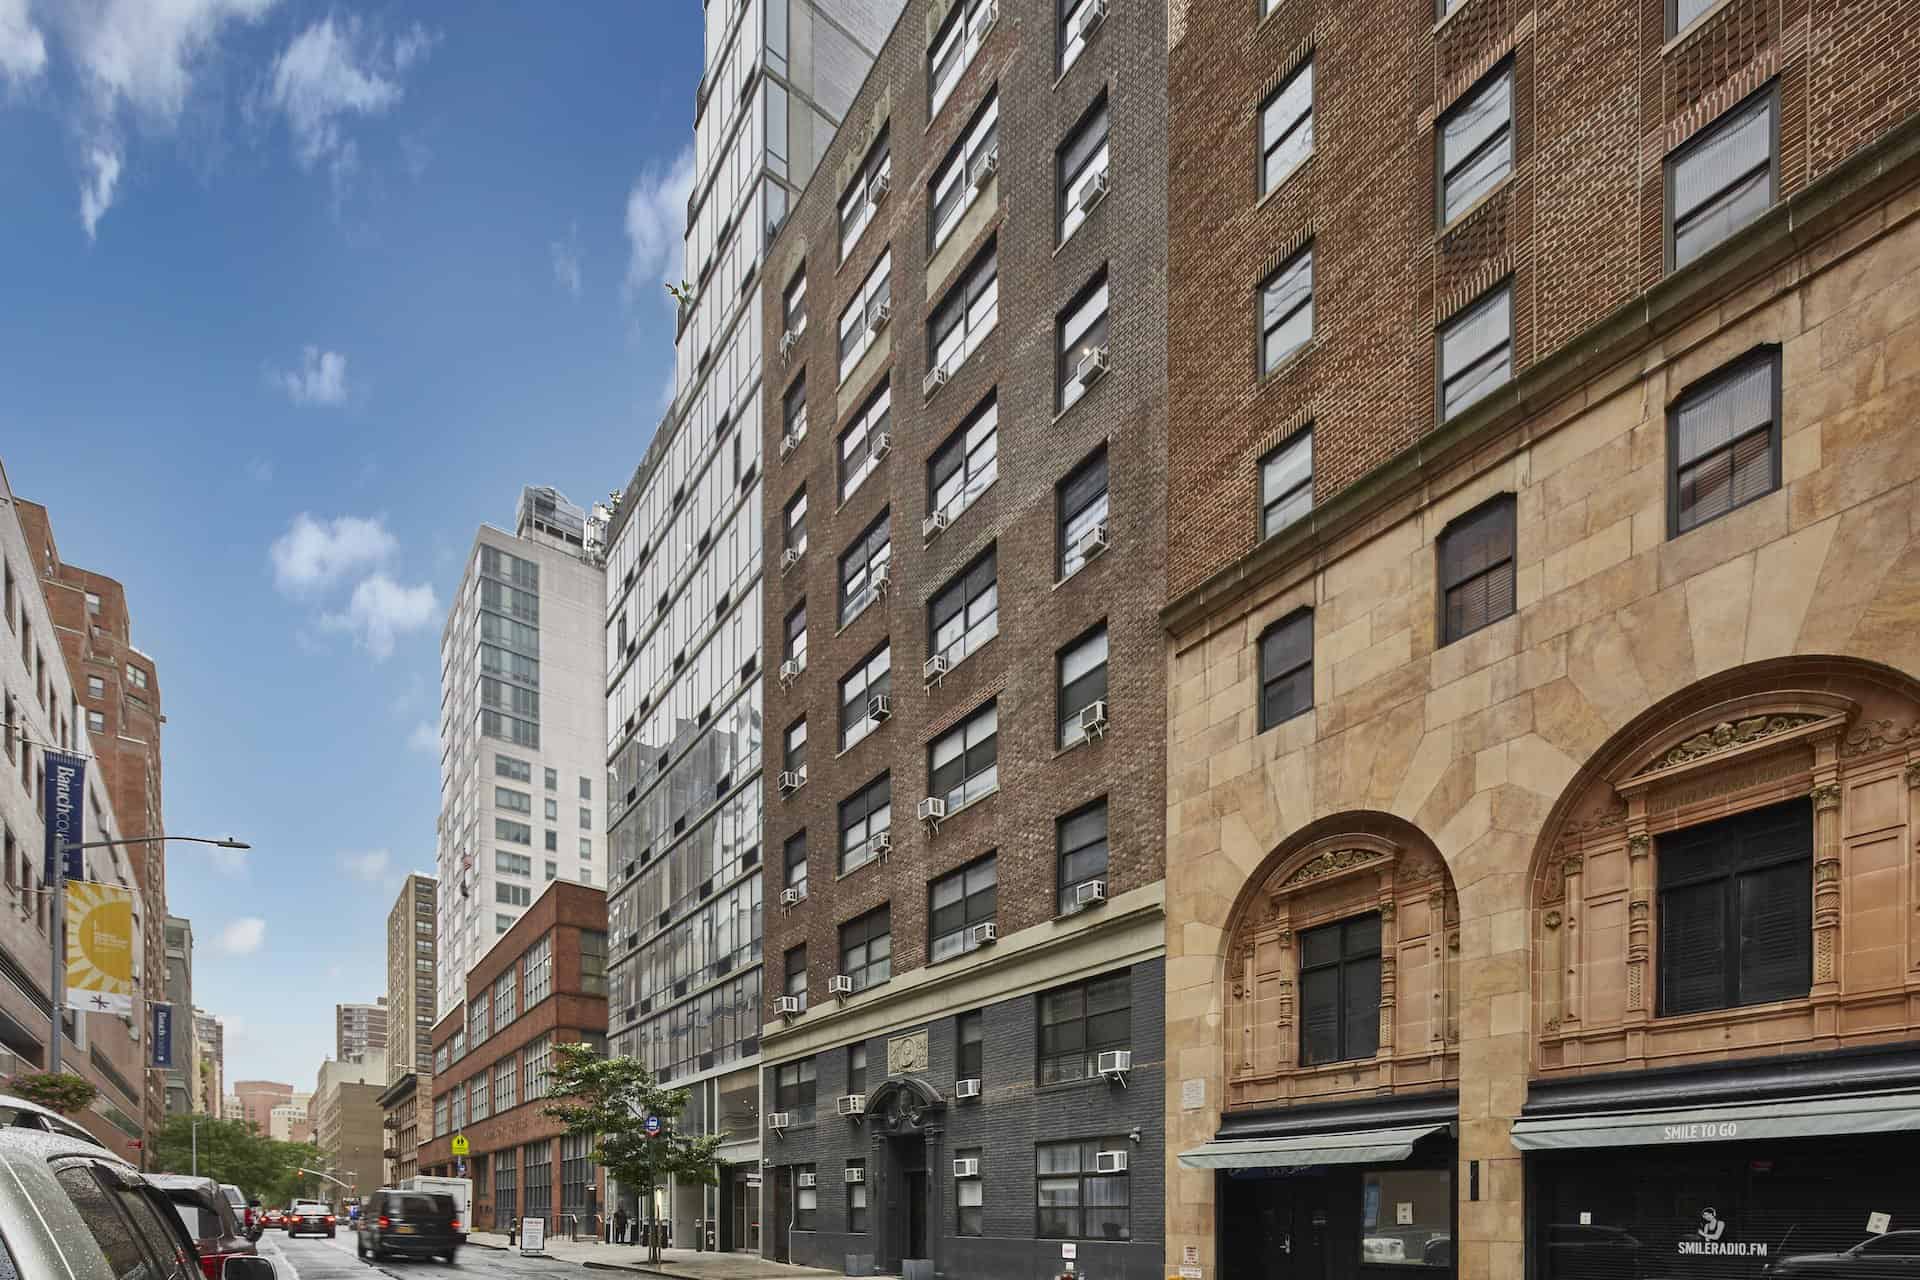 Exterior of 144 East 24th Street apartments in Kips Bay. Tall brick residential building with arched entryway.